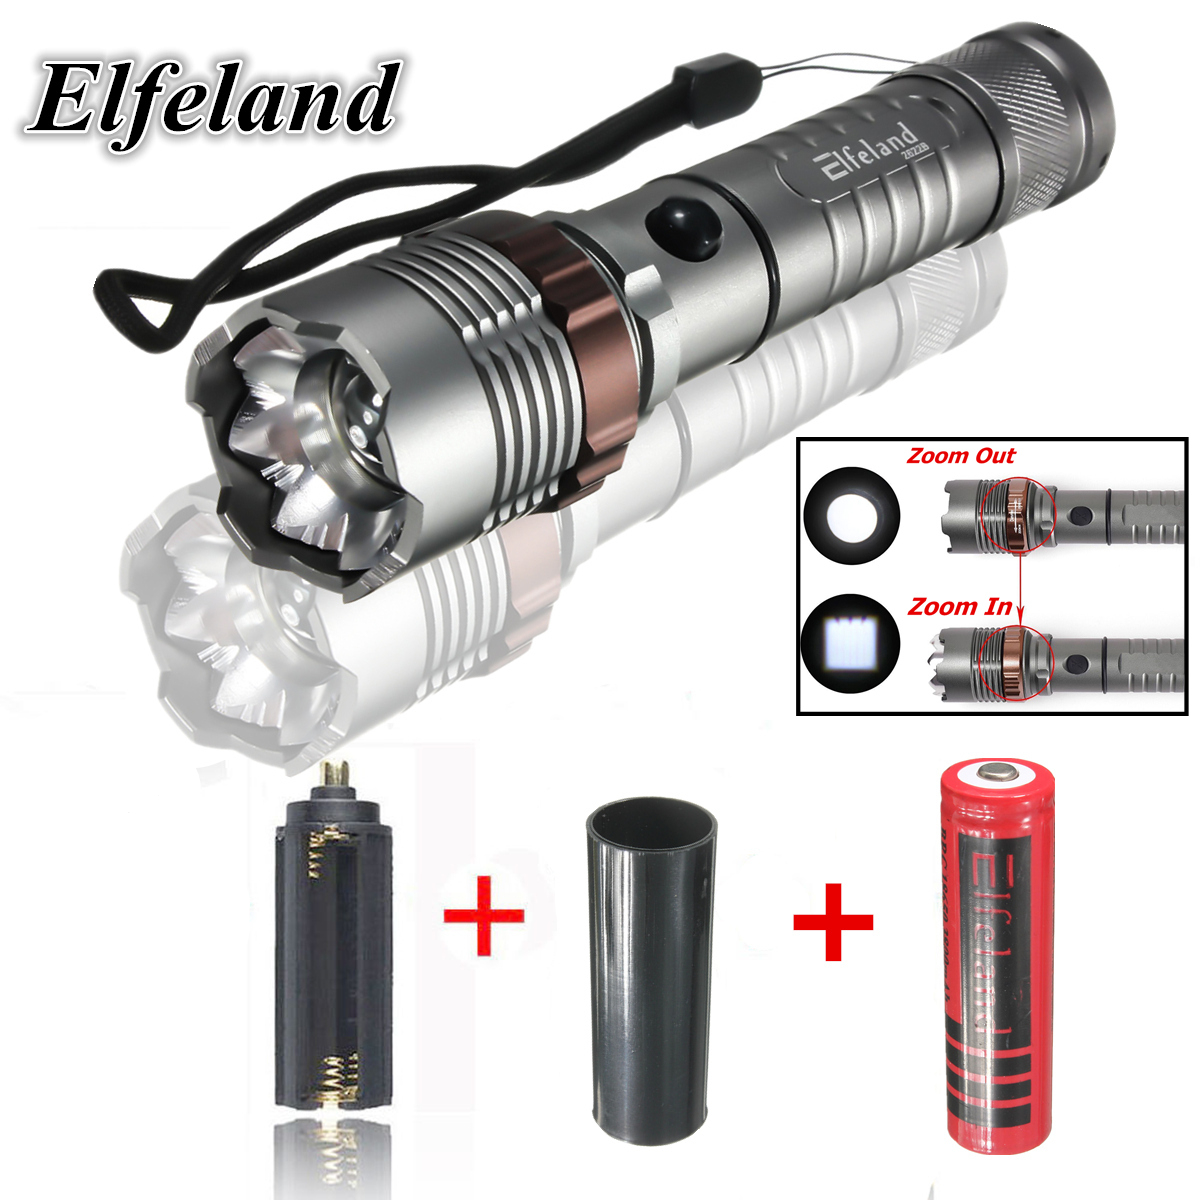 2600LM-T6-LED-Flashlight-Zoomable-5Modes-18650-Torch-Super-Bright-Torch-Lamp-For-Camping-Hiking-Cycl-1934827-1